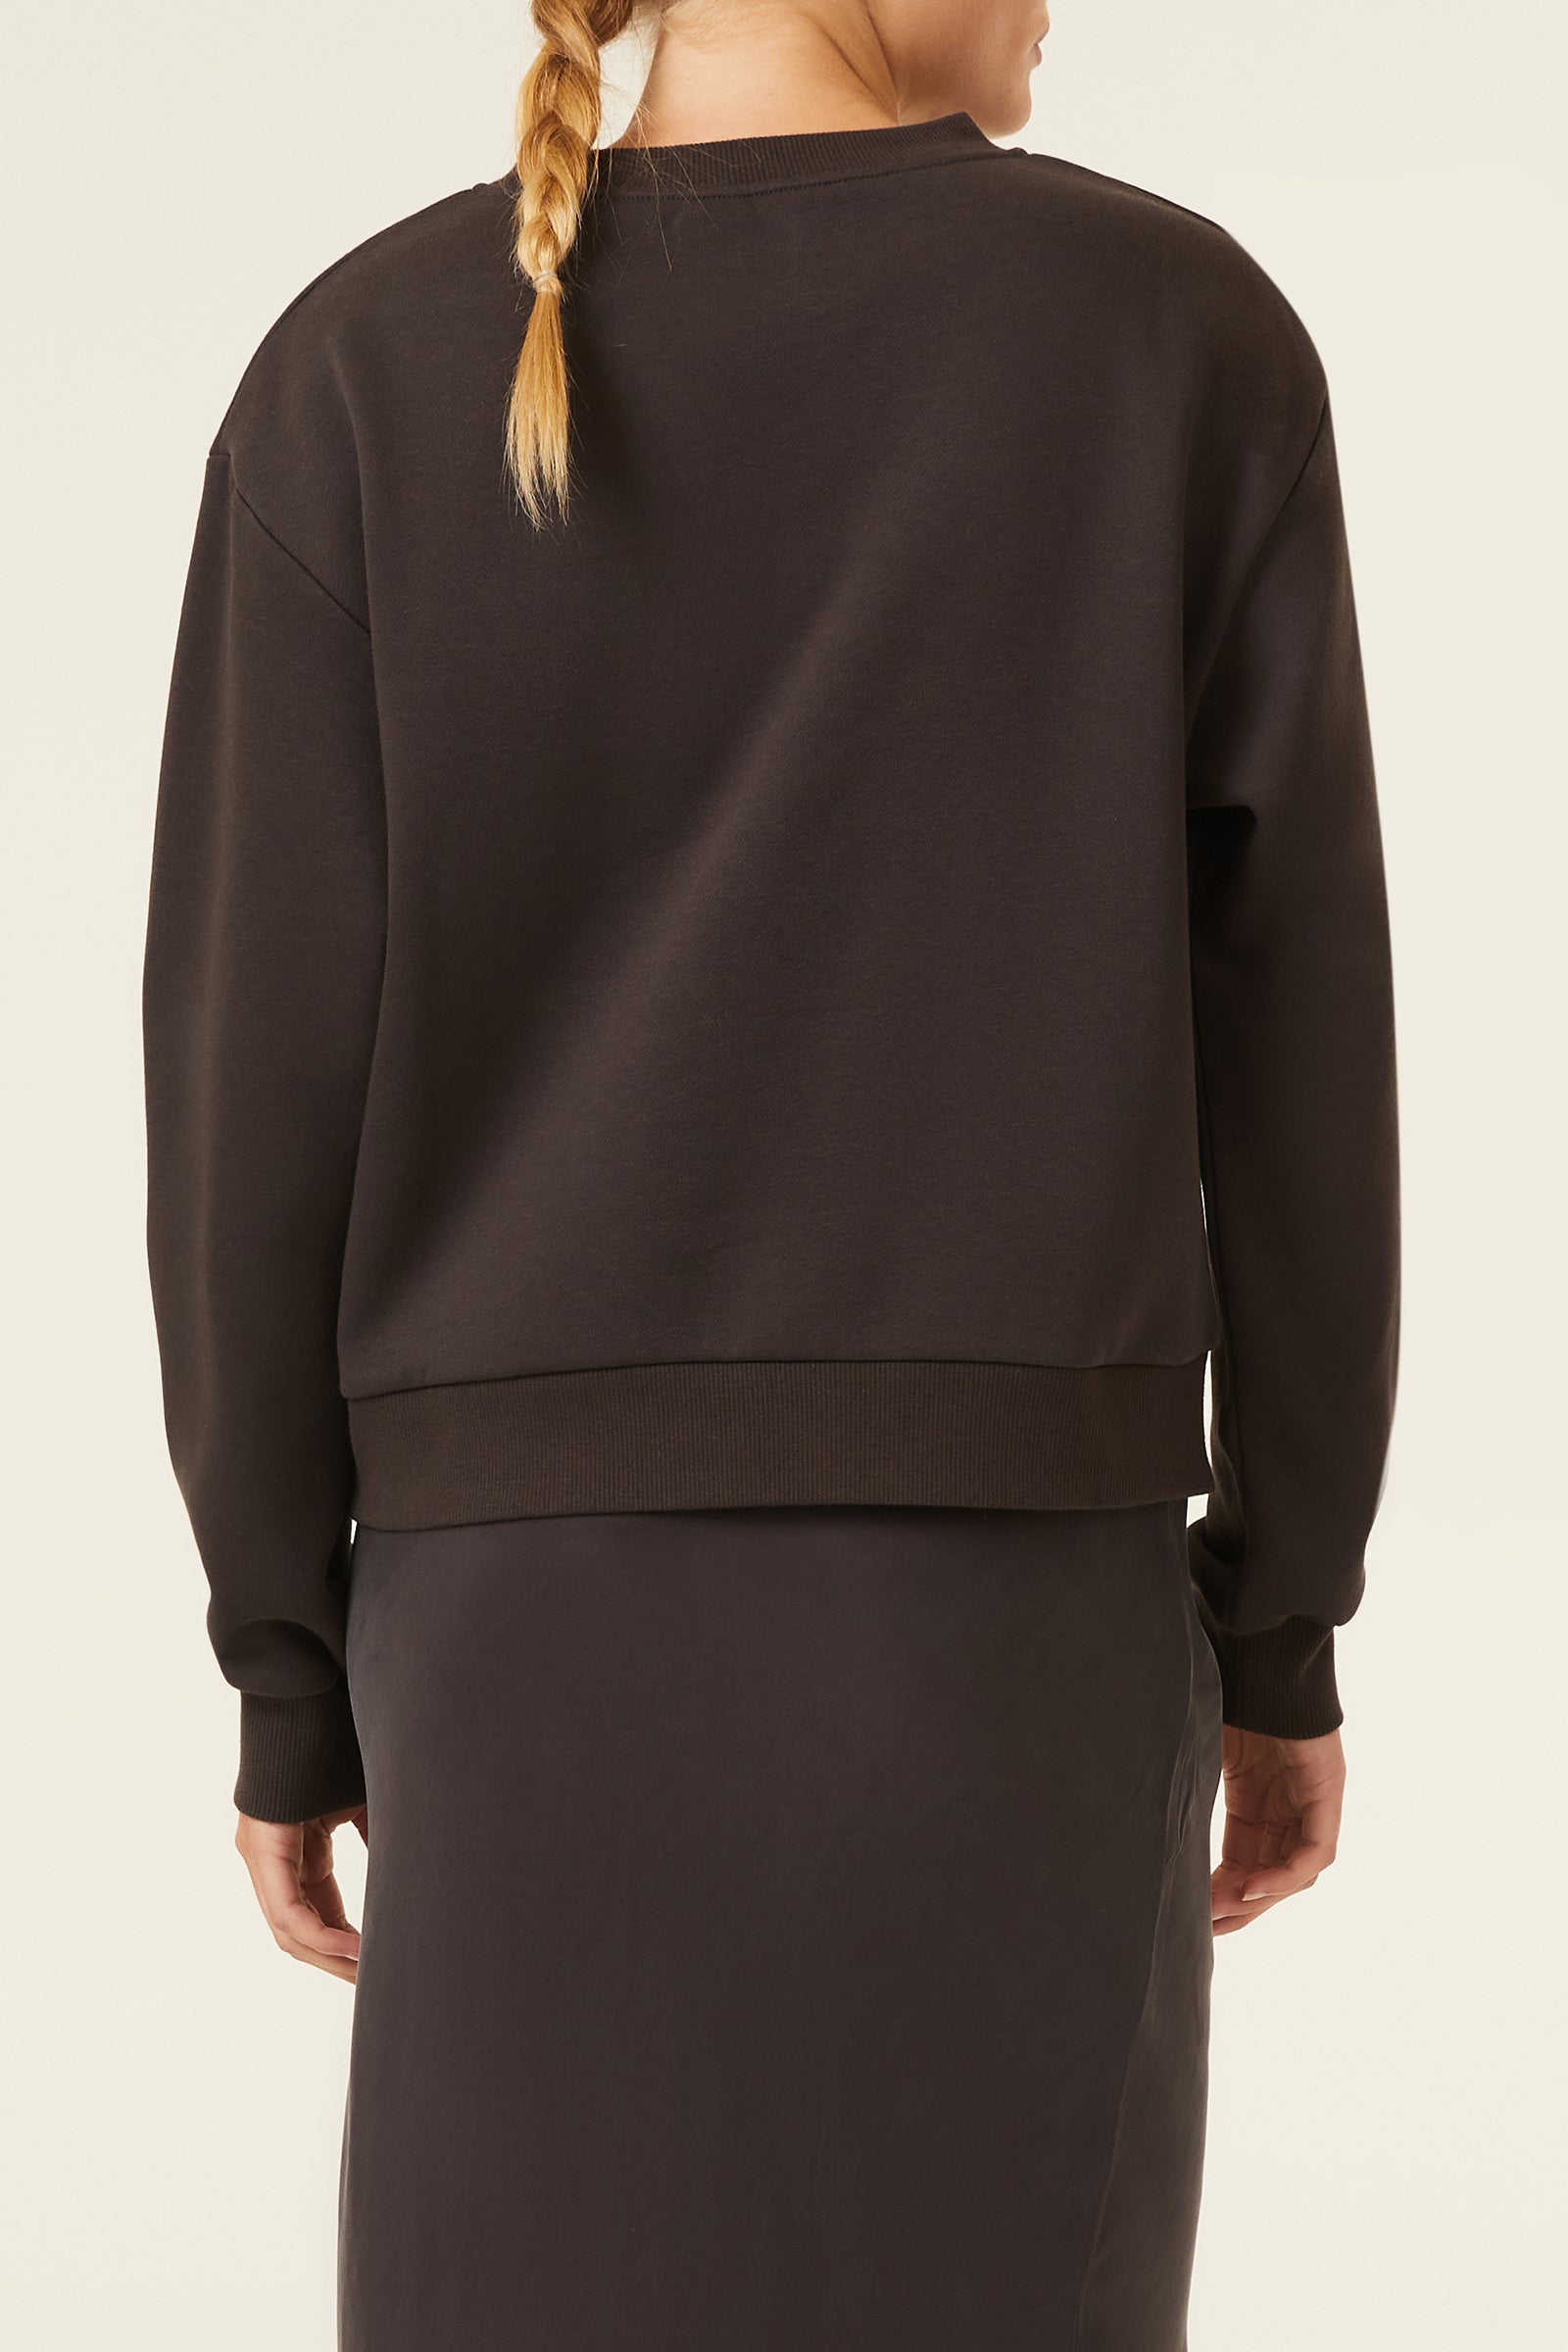 Nude Lucy Nude Heritage Sweat In A Dark Grey In A Brown Coal Colour 